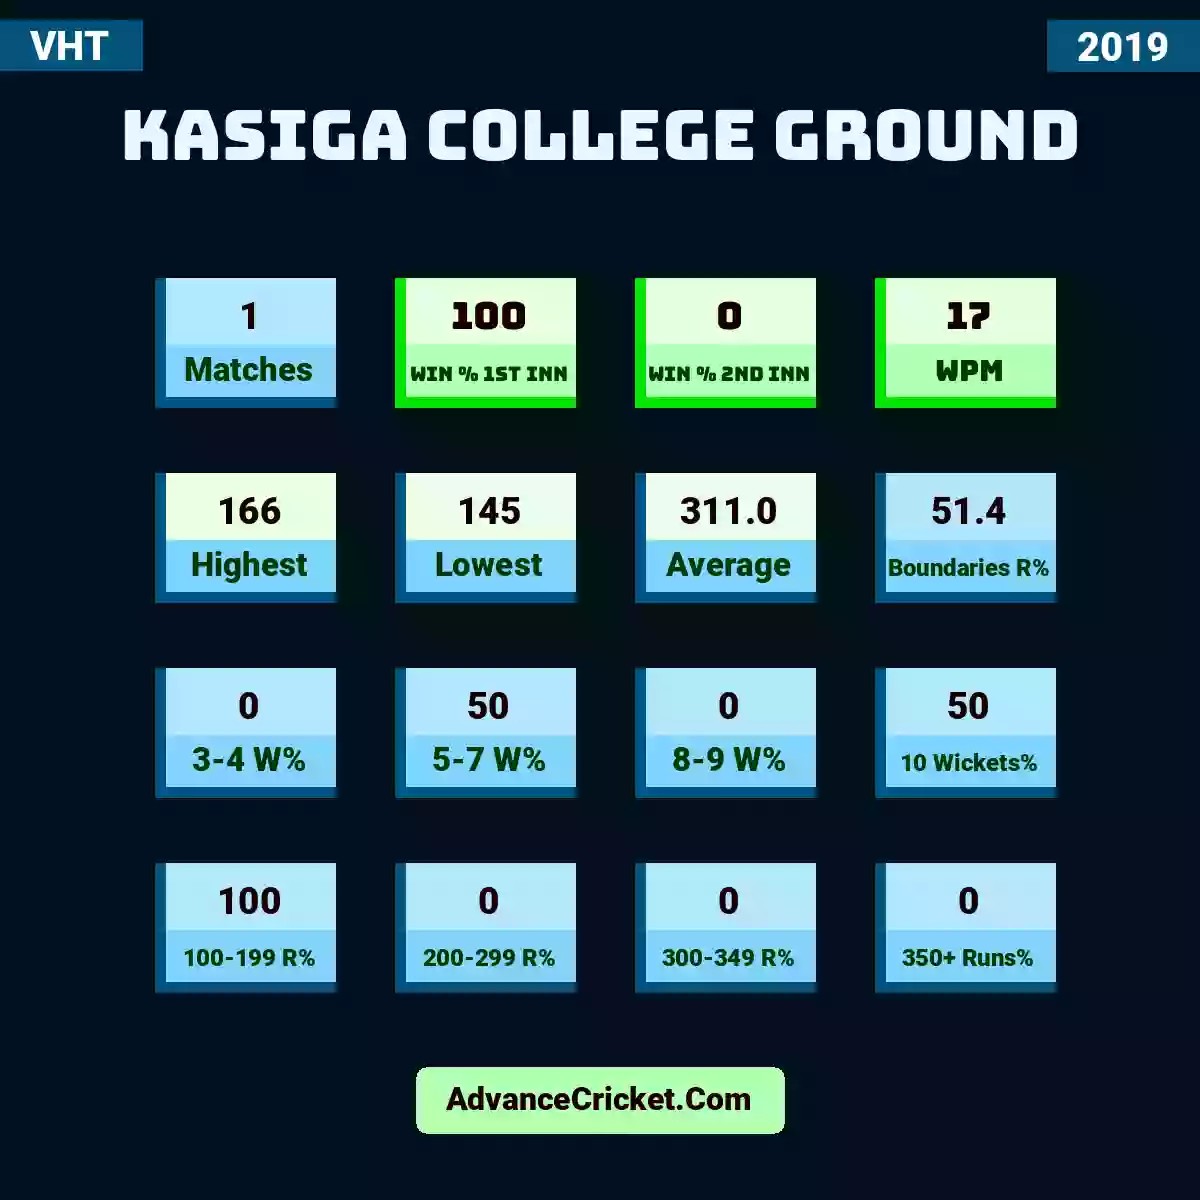 Image showing Kasiga College Ground with Matches: 1, Win % 1st Inn: 100, Win % 2nd Inn: 0, WPM: 17, Highest: 166, Lowest: 145, Average: 311.0, Boundaries R%: 51.4, 3-4 W%: 0, 5-7 W%: 50, 8-9 W%: 0, 10 Wickets%: 50, 100-199 R%: 100, 200-299 R%: 0, 300-349 R%: 0, 350+ Runs%: 0.